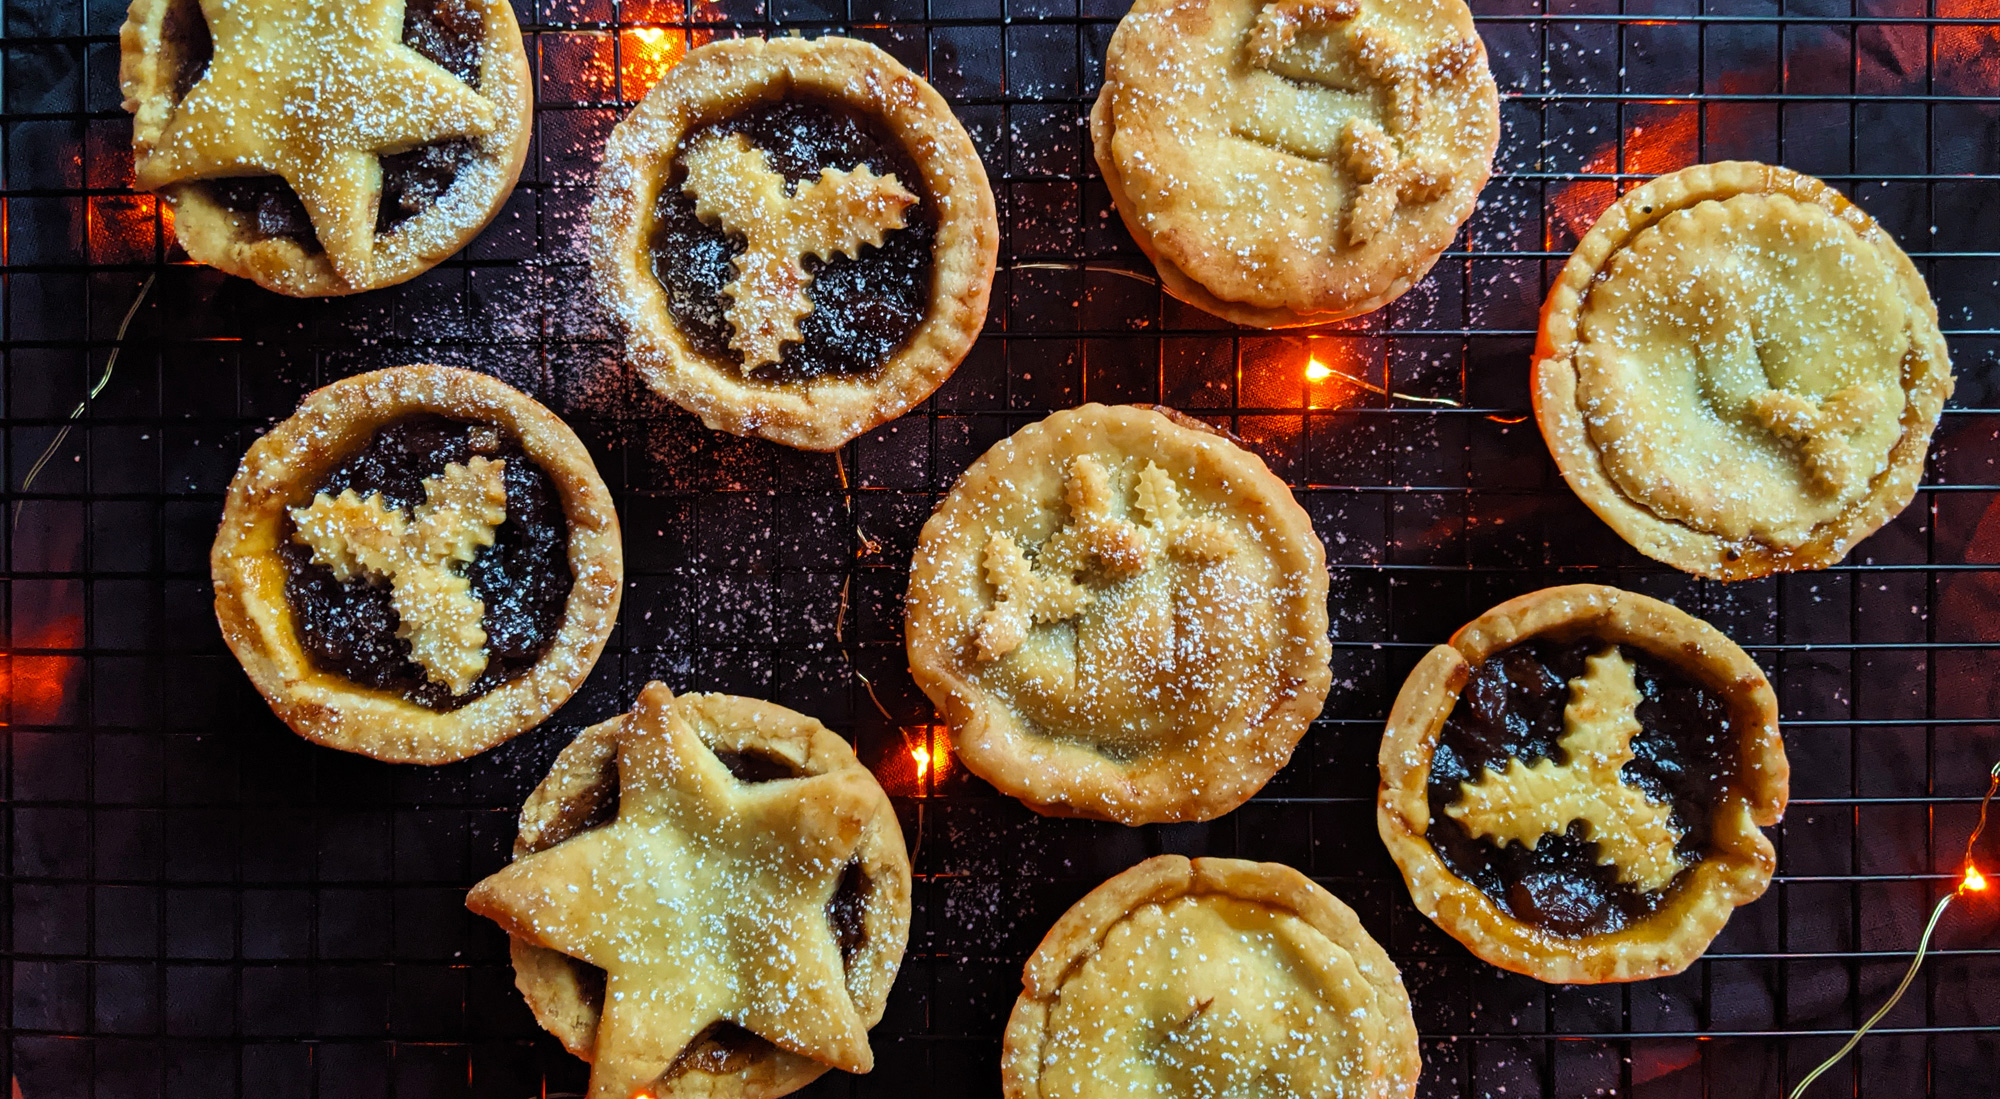 https://www.mygfguide.com/wp-content/uploads/2020/11/mince-pies-cover.jpg